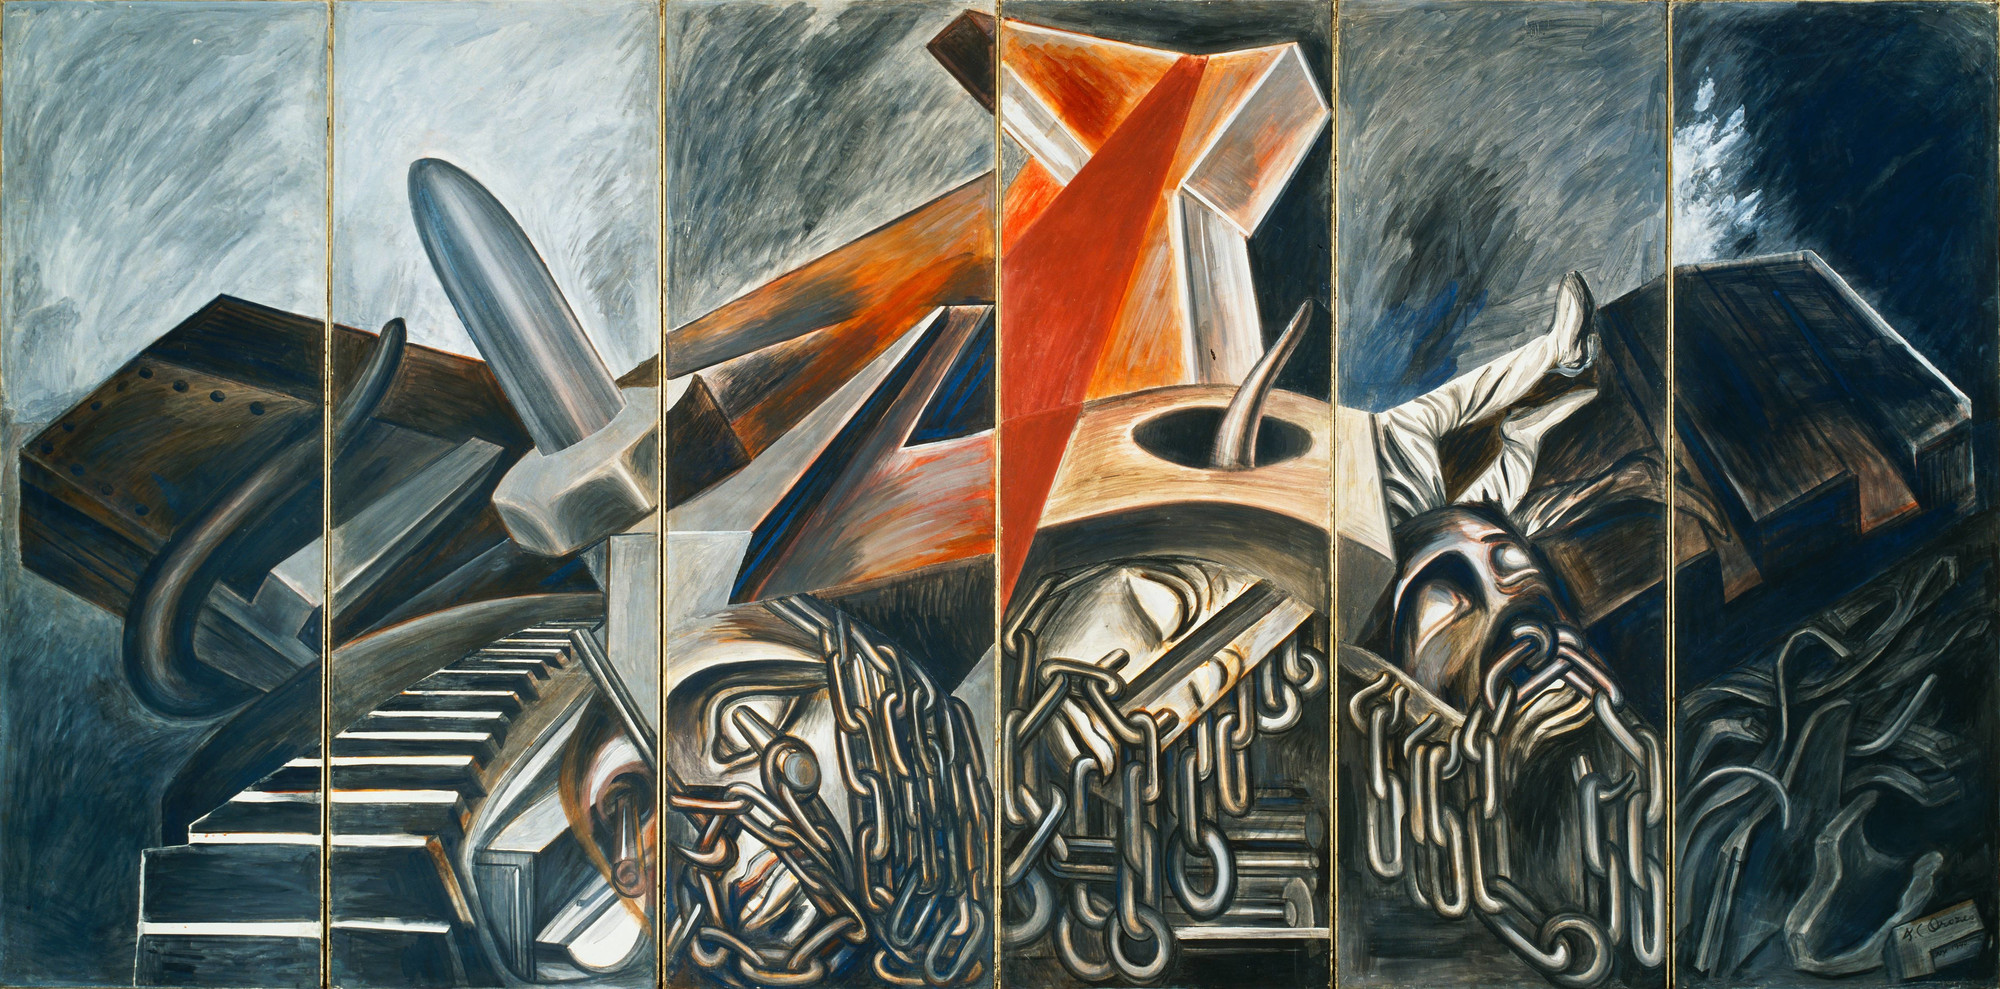 José Clemente Orozco, Dive Bomber and Tank, 1940, fresco, six panels, 275 x 91.4 cm each, 275 x 550 cm overall (The Museum of Modern Art, New York)